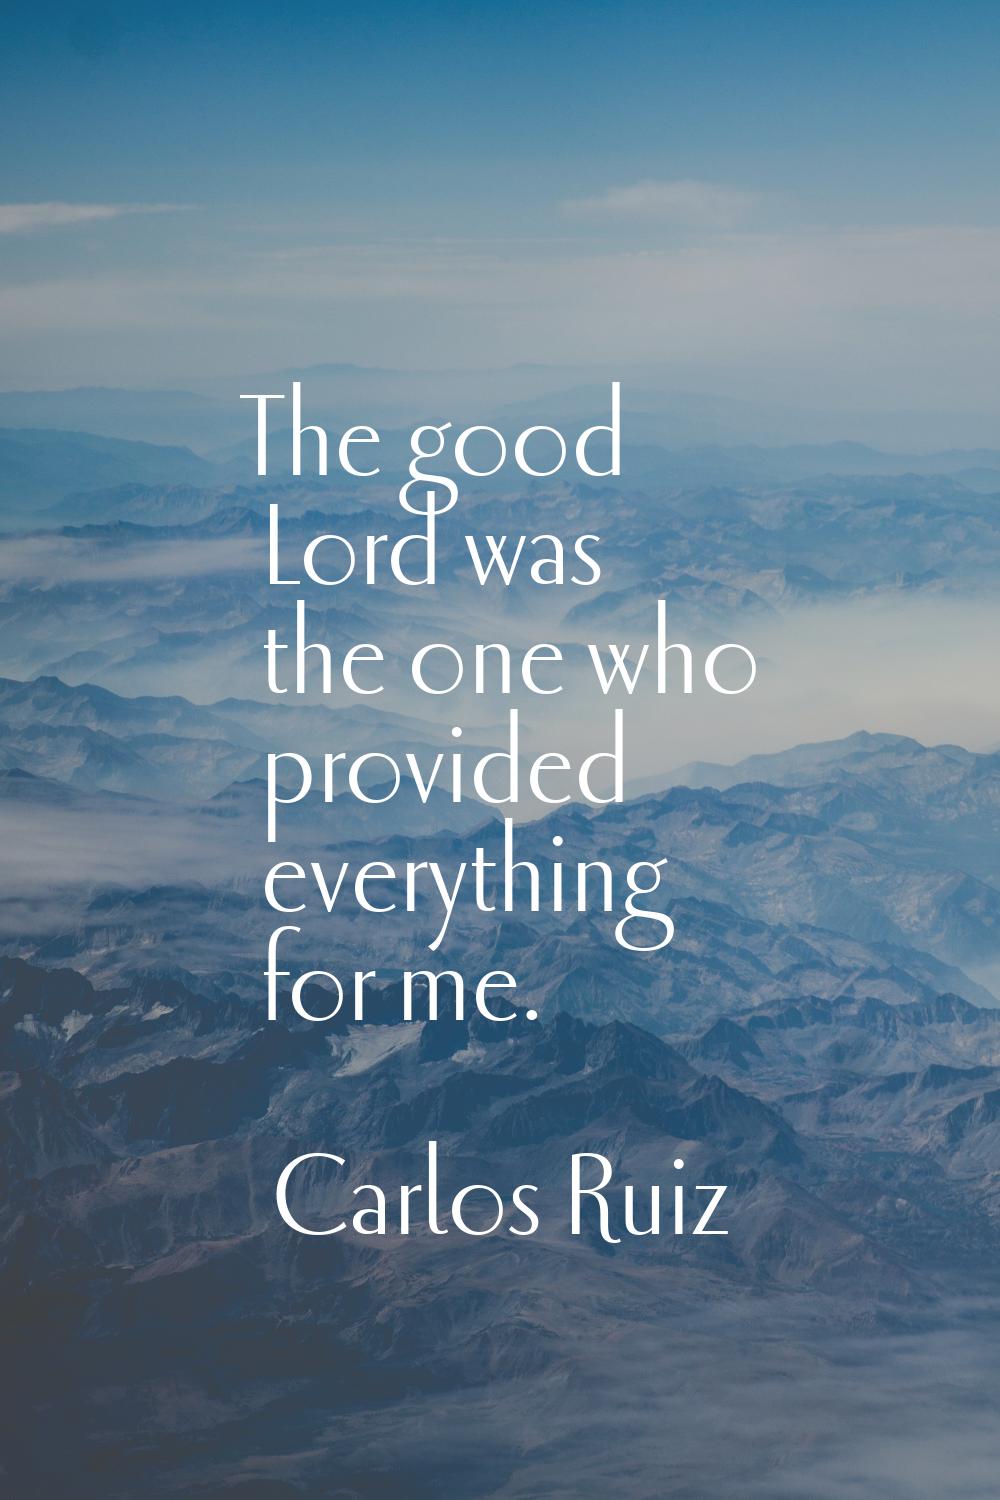 The good Lord was the one who provided everything for me.